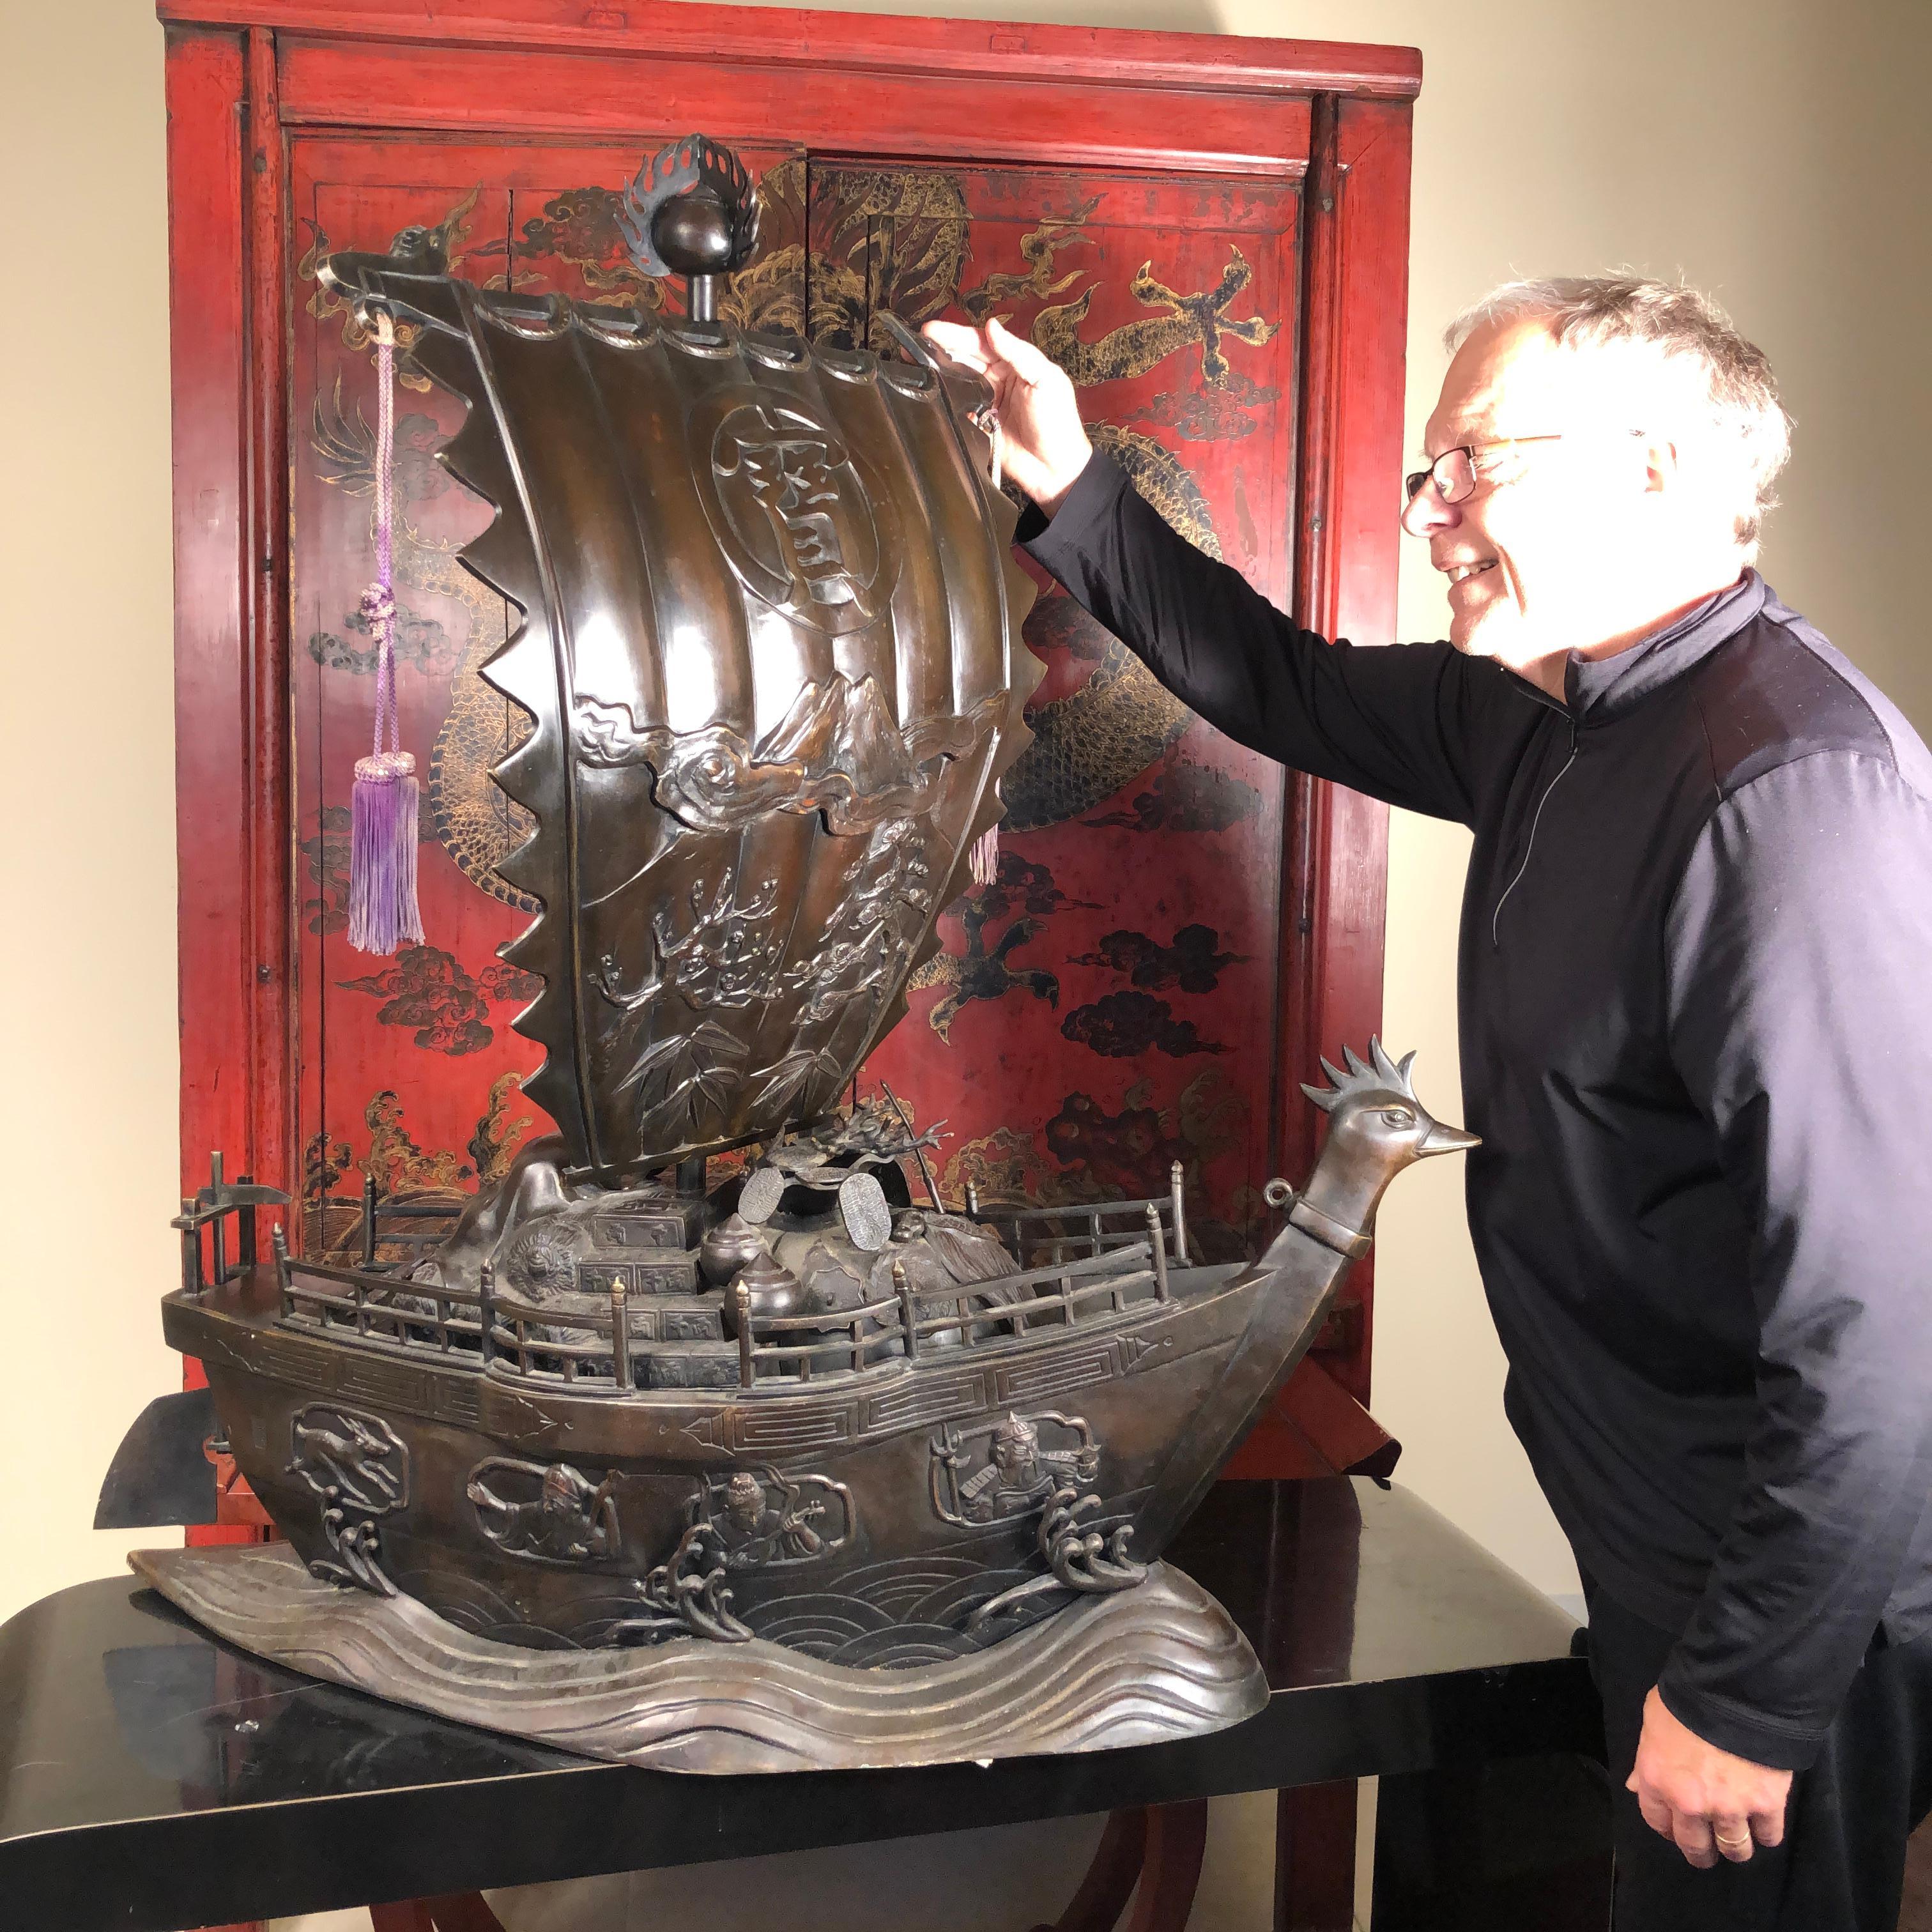 Huge 43 inch high Japanese Bronze Treasure Masterwork

Suited for a museum, special indoor gallery space, or garden comes this Japanese superbly hand cast solid bronze fortune treasure boat 